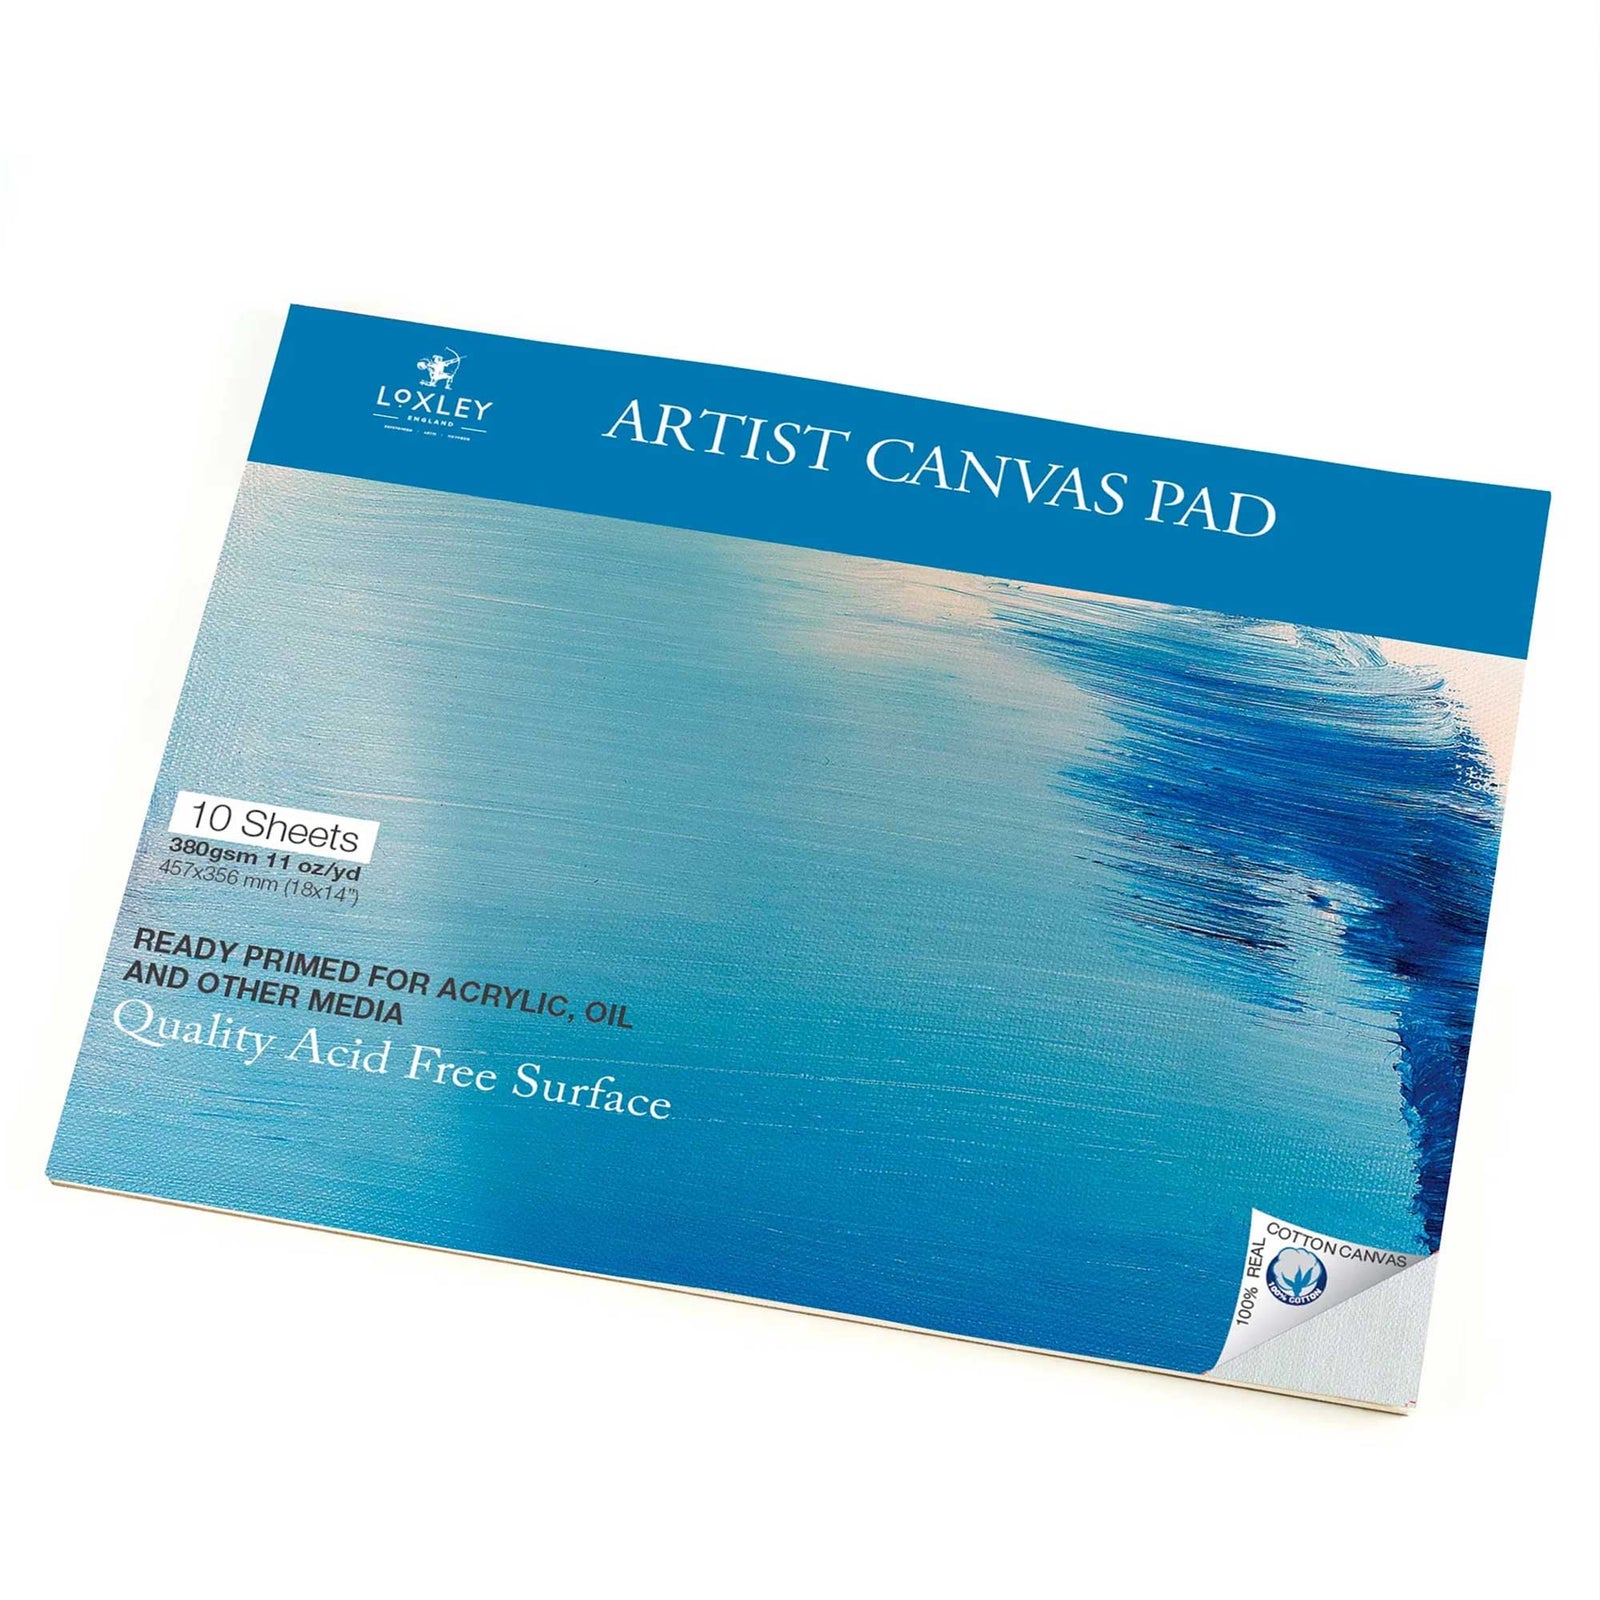 A3 Oil Painting Paper Pad Book Cotton Canvas Pad Painting Paper